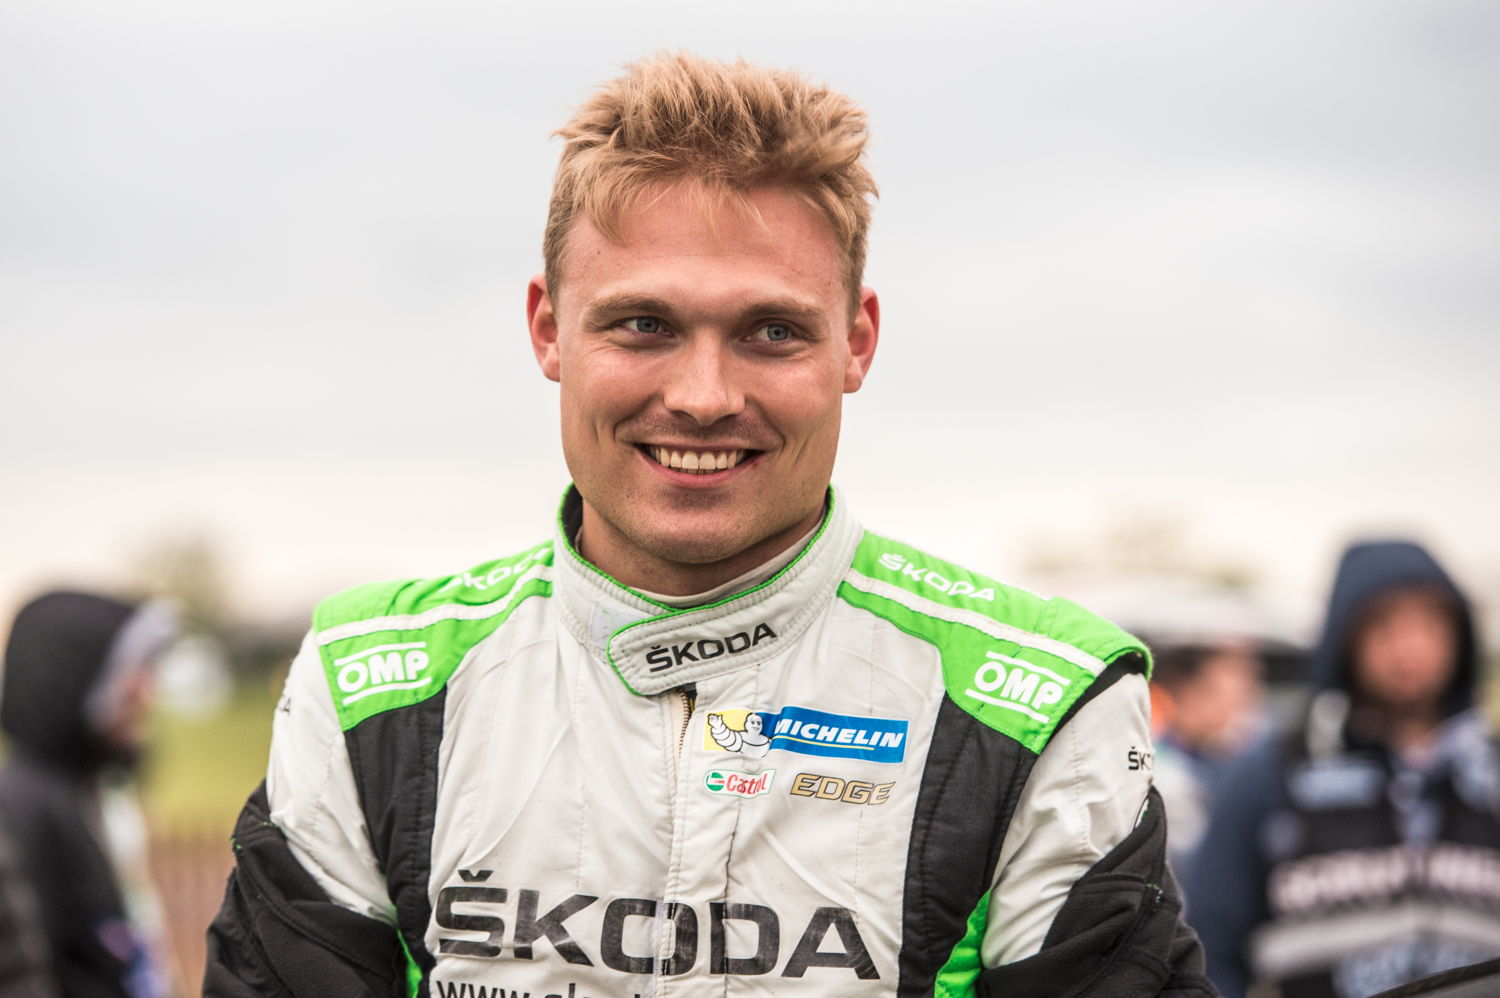 Pontus Tidemand (ŠKODA FABIA R5) could extend his championship lead in WRC 2 category at Rally Poland